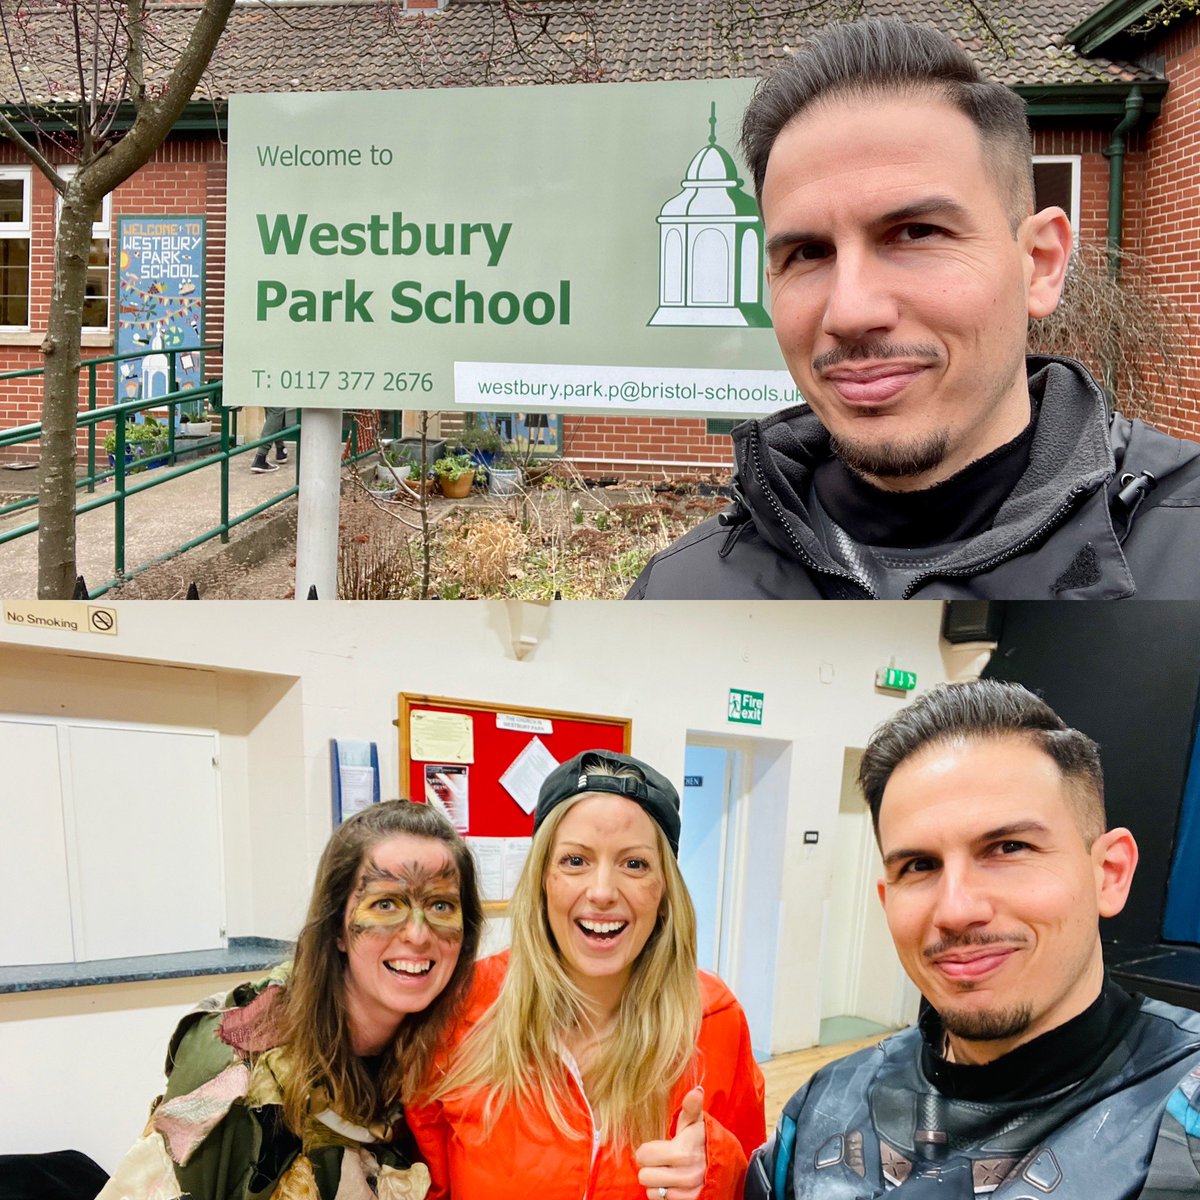 Saw 120 children @WestburyParkPr today and they were all dressed up for #WorldBookDay including the teachers. Awesome fun! I think they were all impressed with my #cosplay as #charlierobonik too! #author #booktour #books #ChildrensBooks #reading